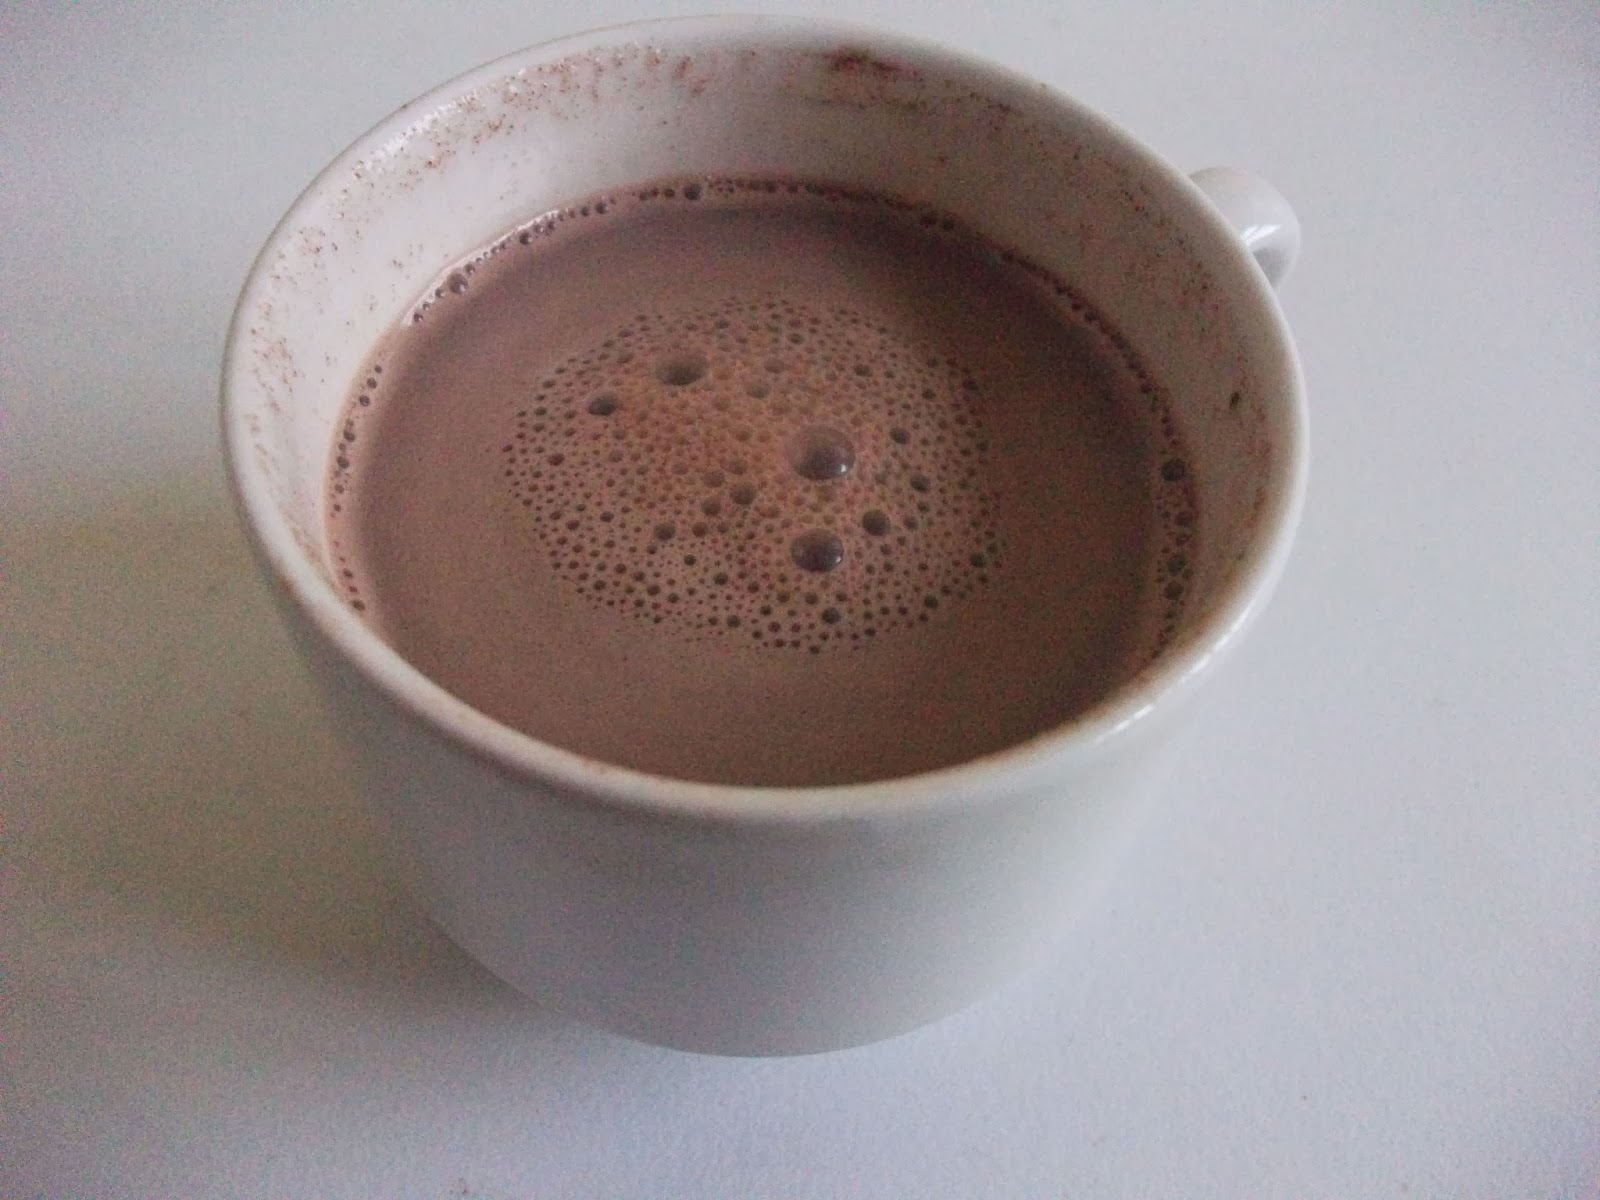 Niederegger Marzipan Flavour Hot Chocolate Review